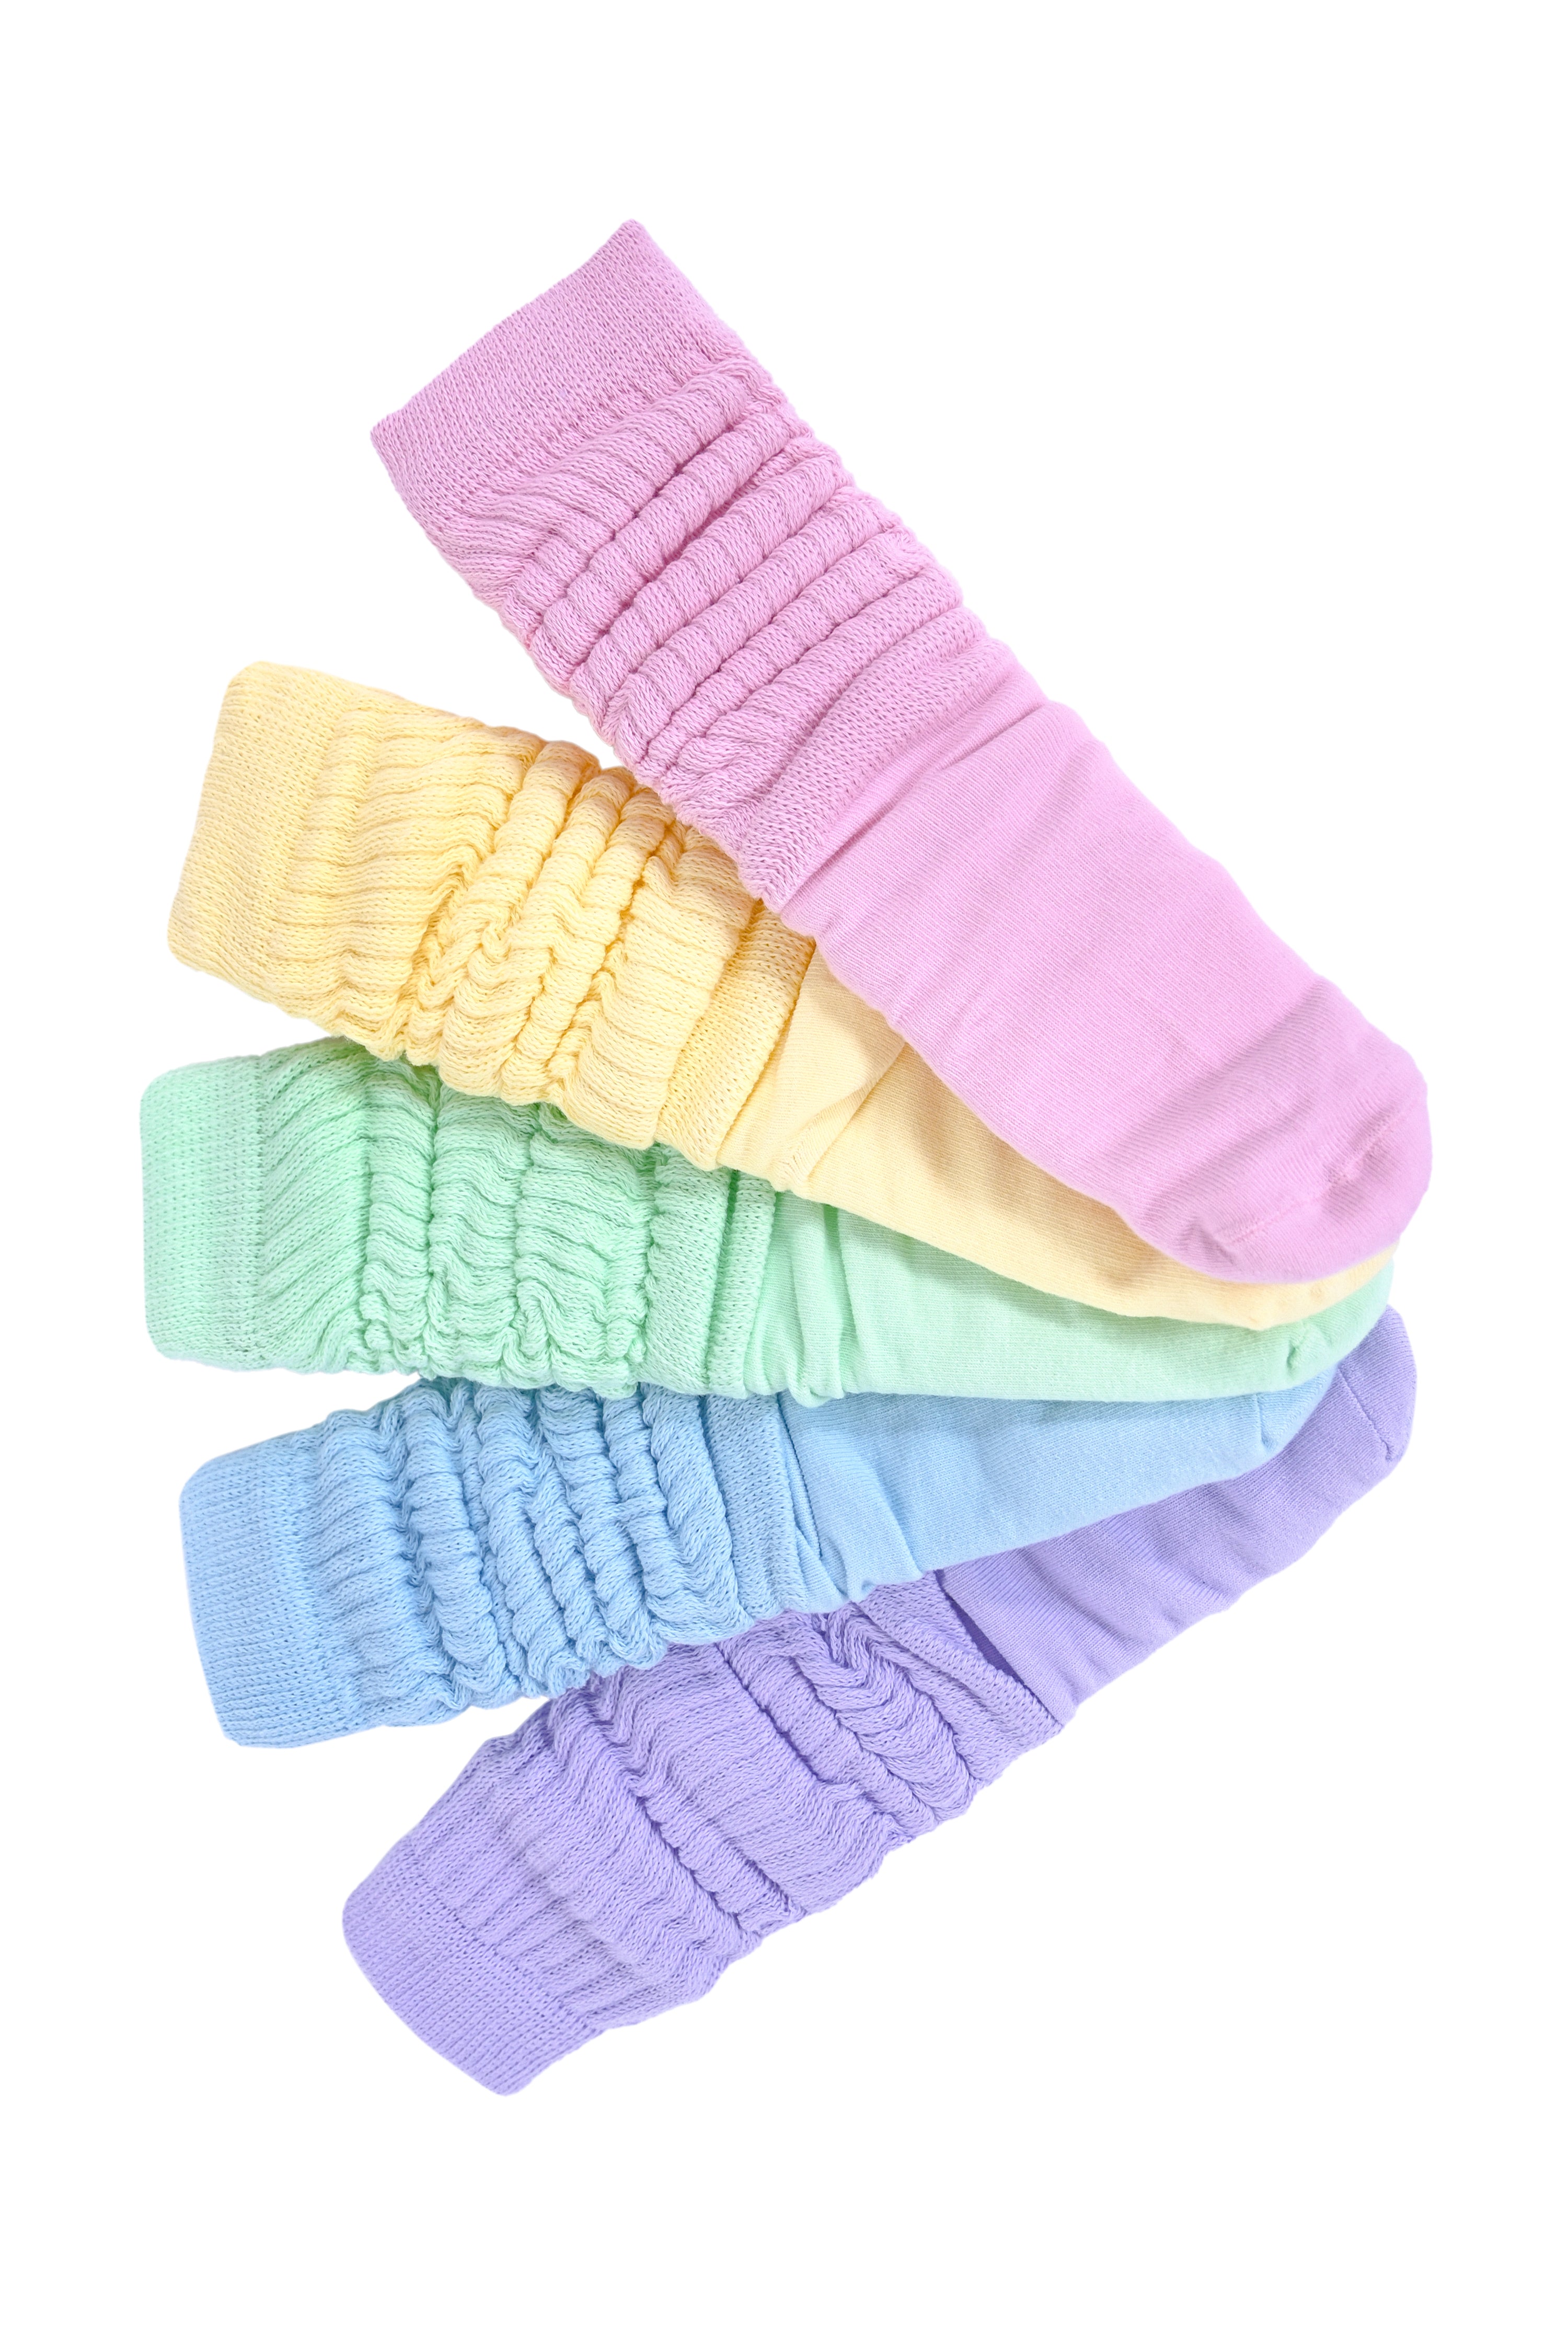 A multipack of pink, lavender, sky blue, mint, and yellow socks  Edit alt text